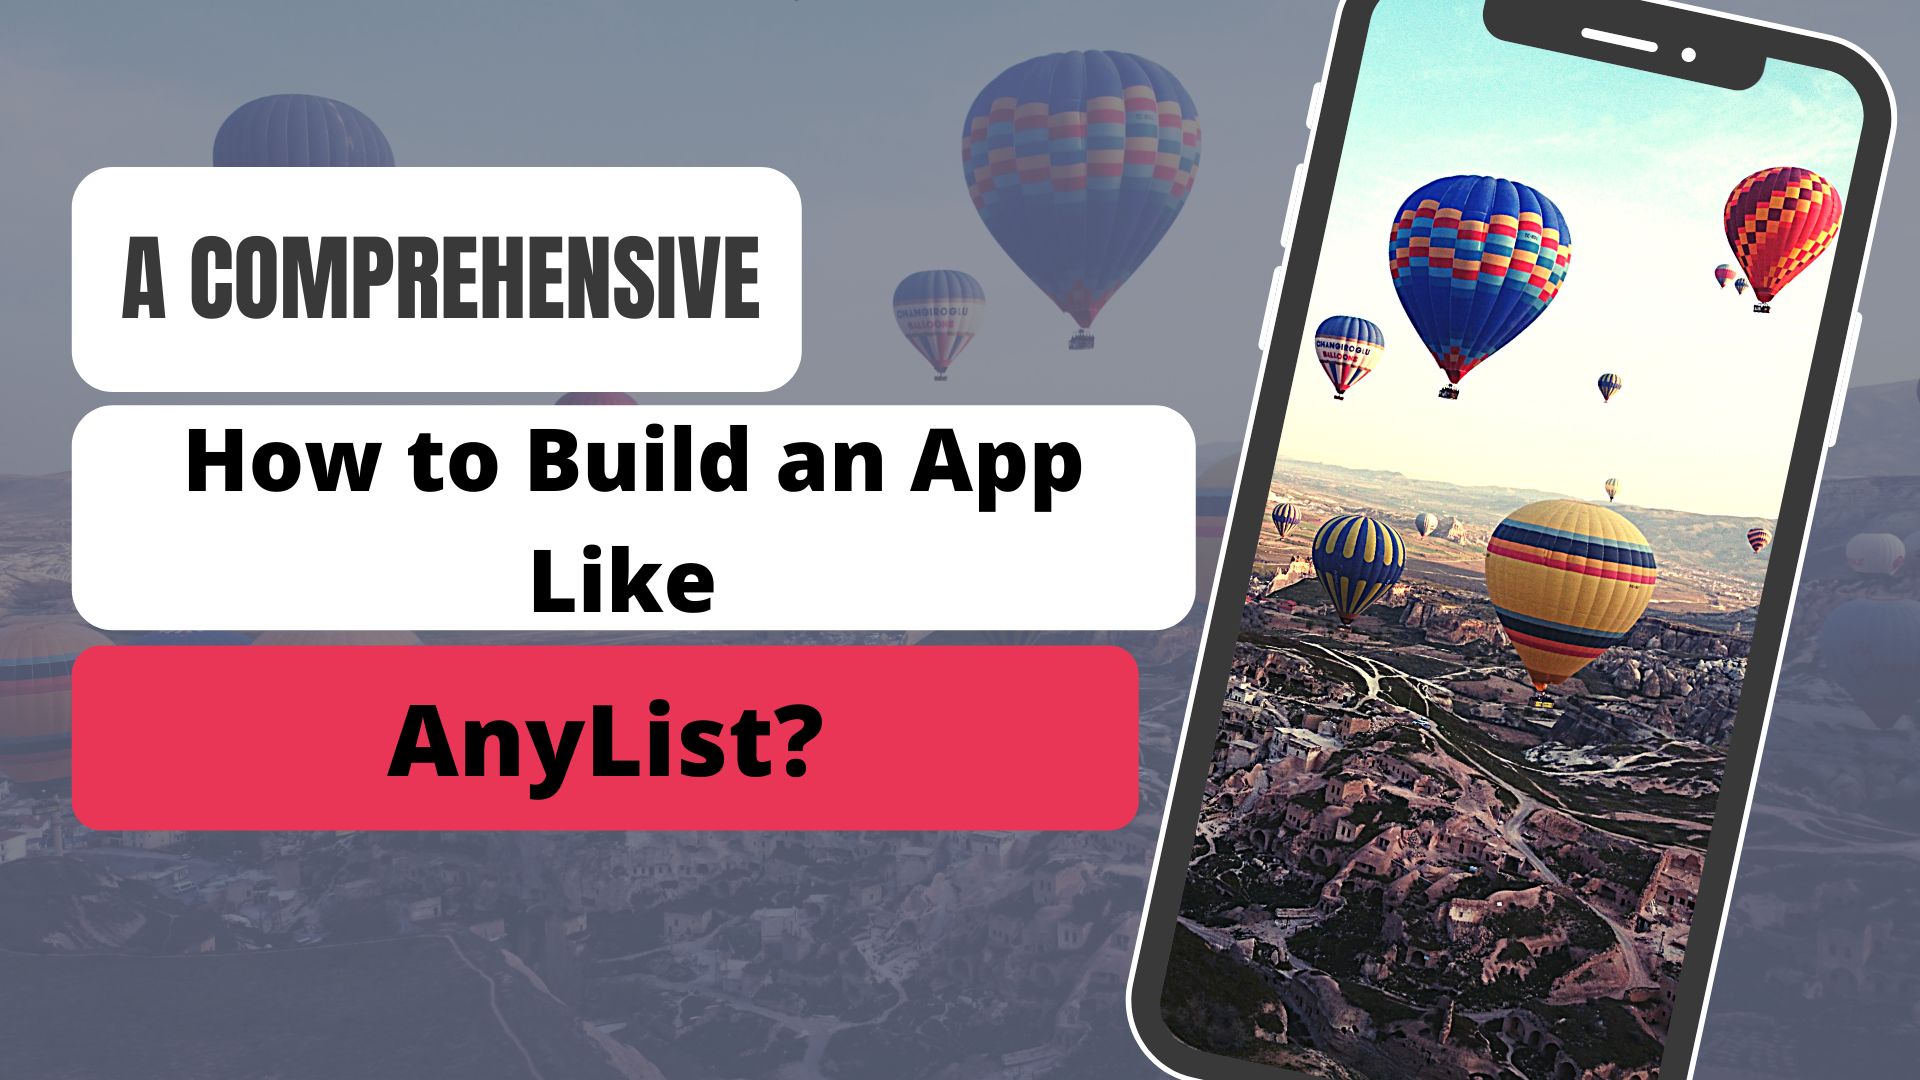 A Comprehensive Guide on How to Build an App Like AnyList?